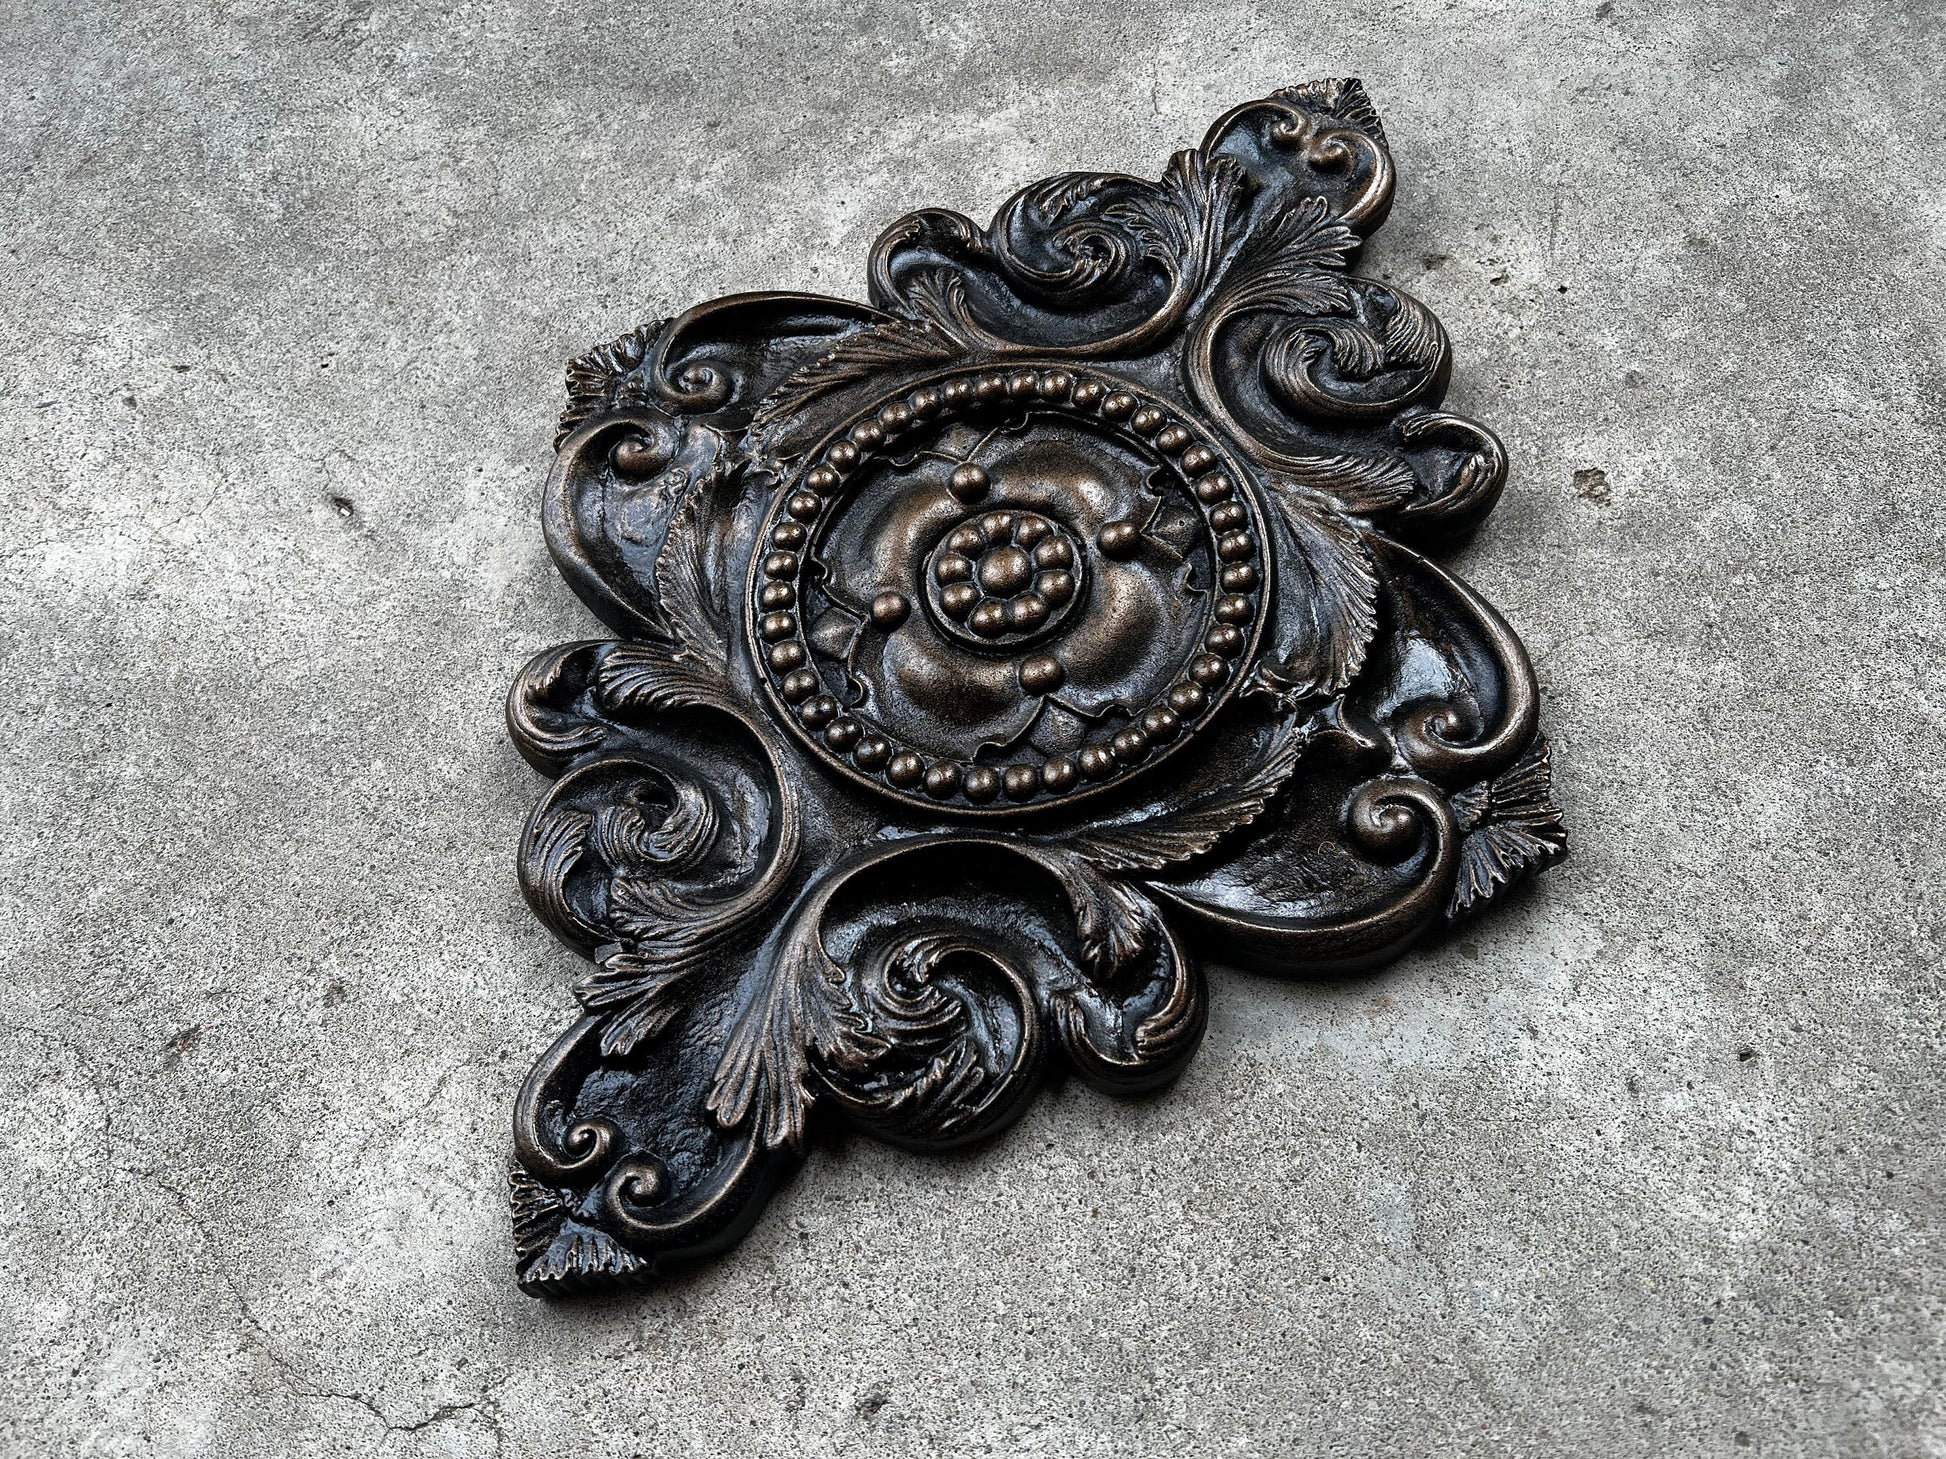 Architectural Wall Medallion | Wall Plaque | Plaster | Home Decor | PICK YOUR COLOR | FleurDeLisJunkie | French Country | Tuscan Wall Decor